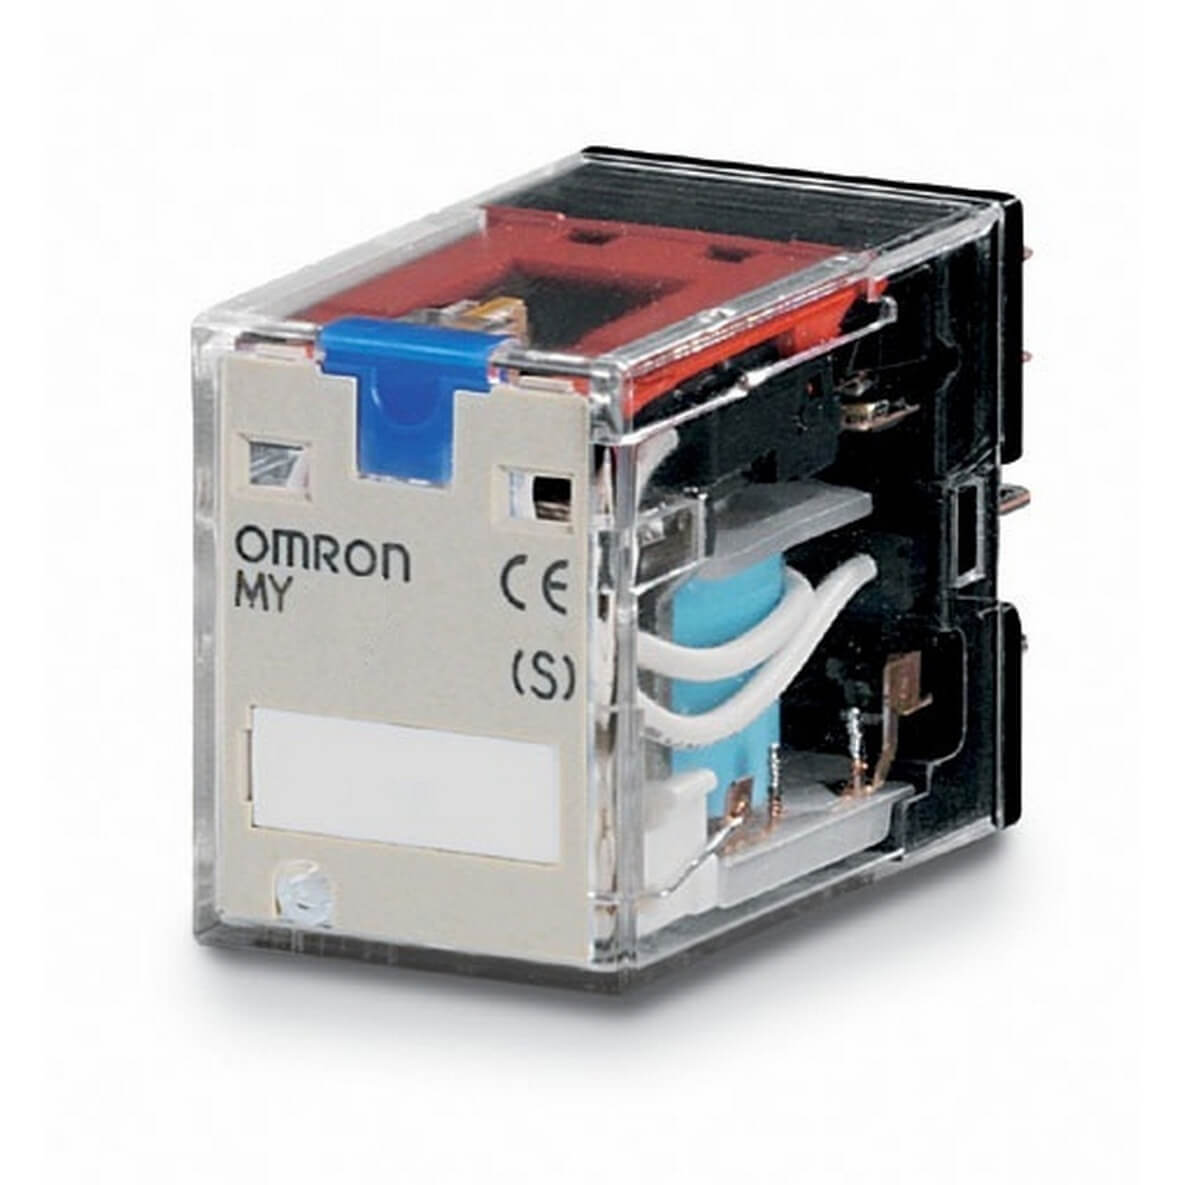 Standard Internal Connections Basic Model Type Plug-In Terminal 11.5 mA at 50 and 10 mA at 60 Hz Rated Load Current Triple Pole Double Throw Contacts Omron MKS3PI-5 AC230 General Purpose Relay with Mechanical Indicator and Lockable Test Button 120 VA 